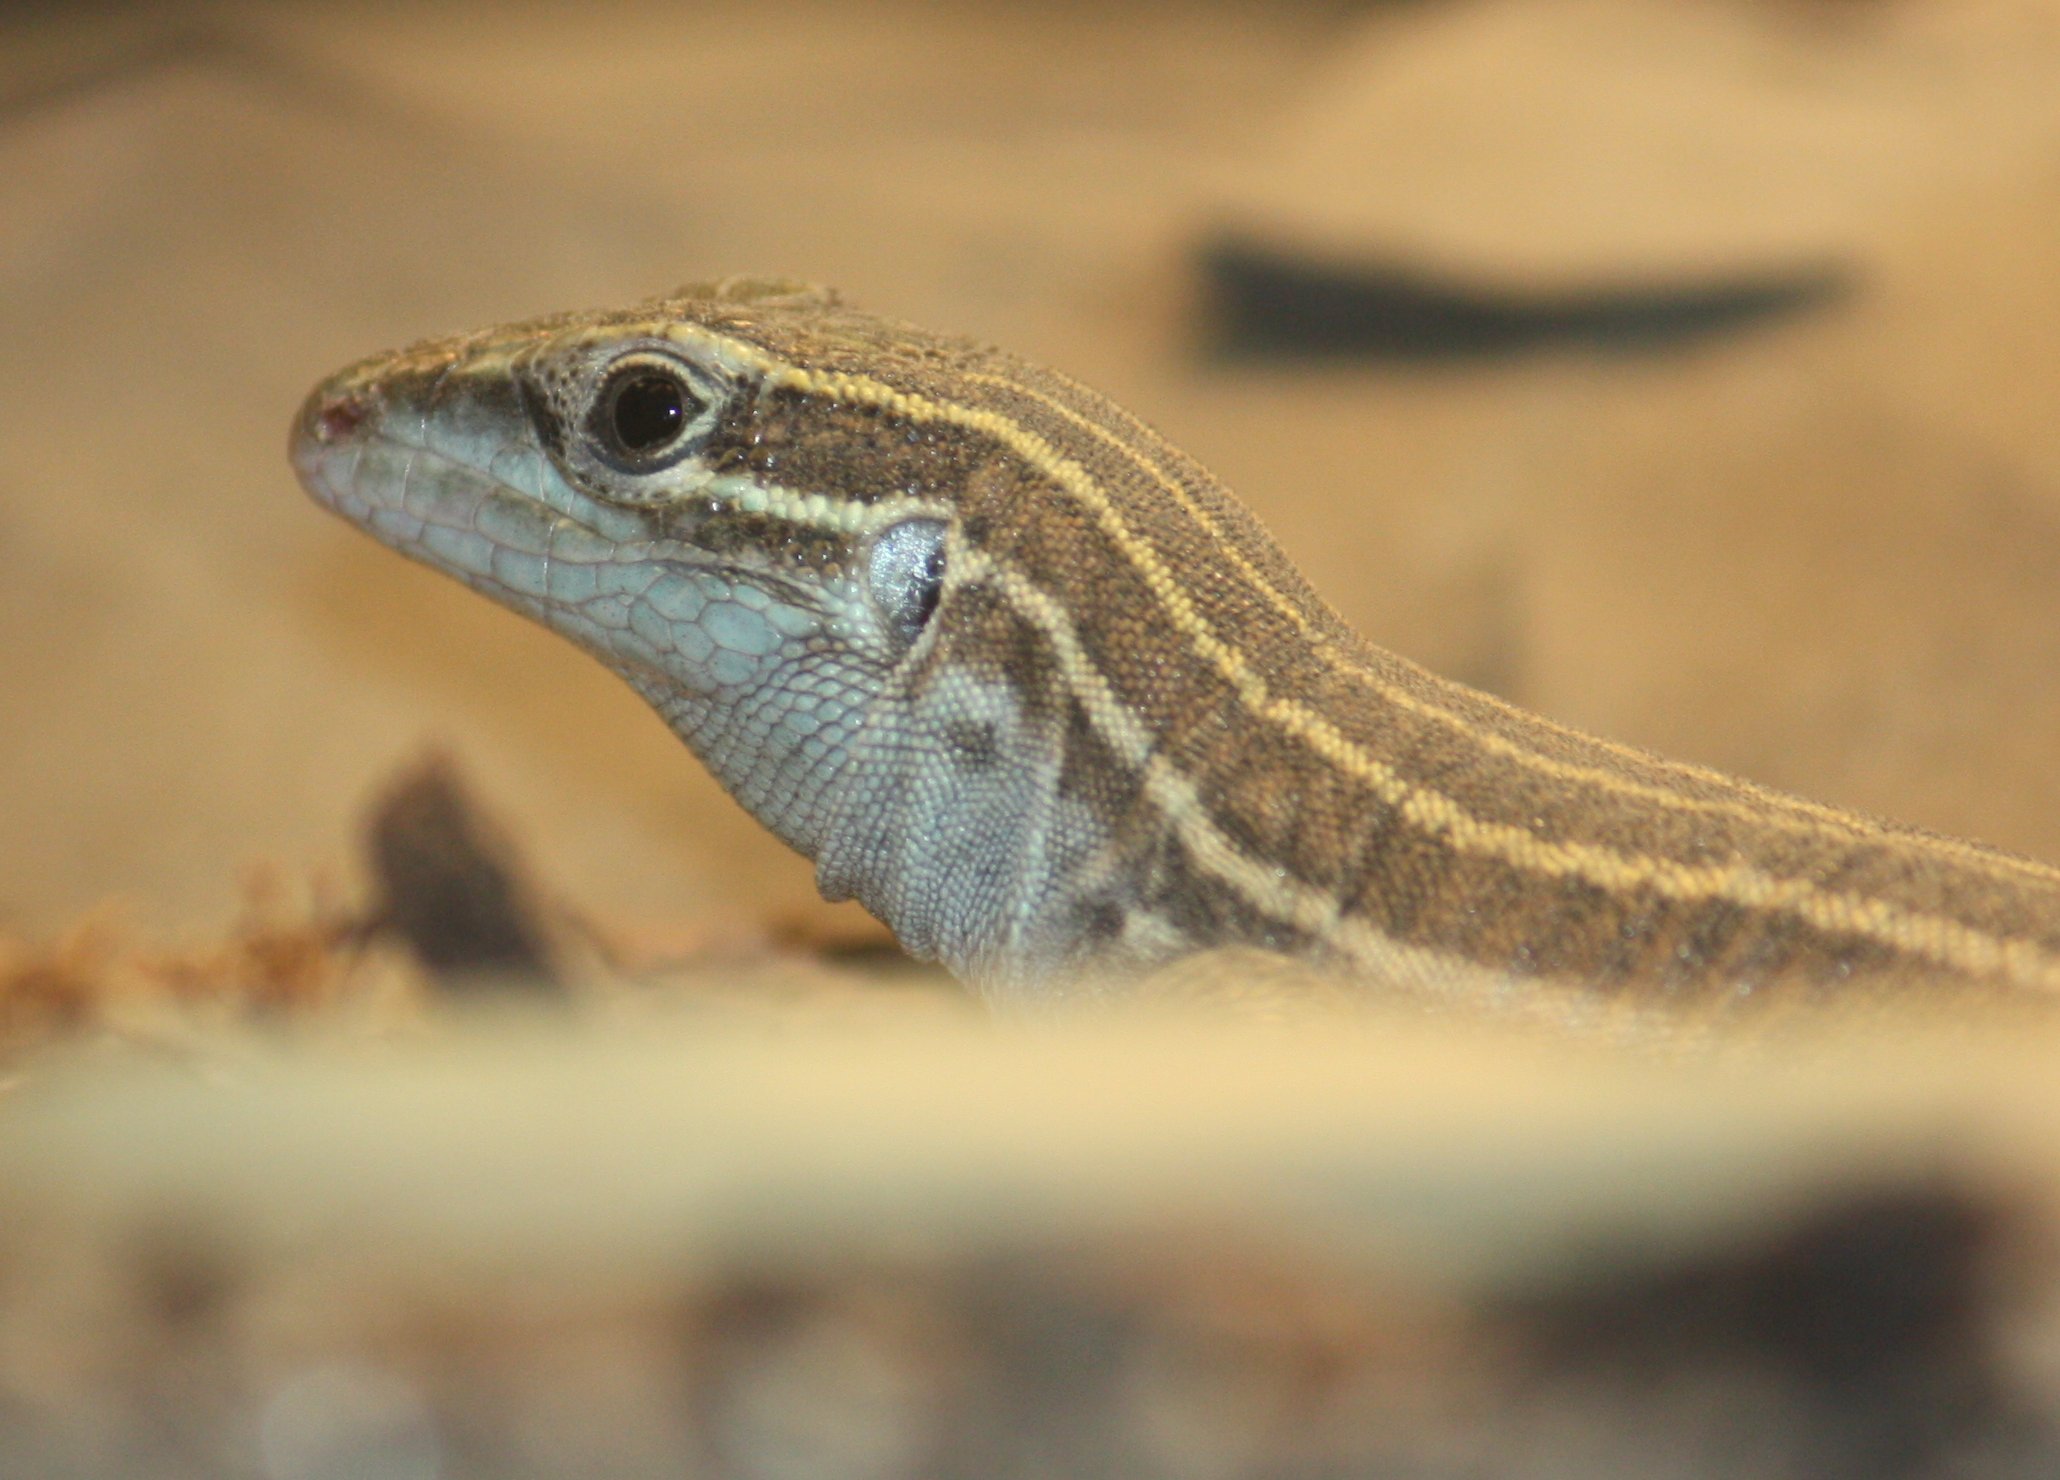 Some species of whiptail lizards, such as this desert grassland whiptail lizard, reproduce exclusively via parthenogenesis. Image By Ltshears (Own work) [CC-BY-SA-3.0 (http://creativecommons.org/licenses/by-sa/3.0)], via Wikimedia Commons